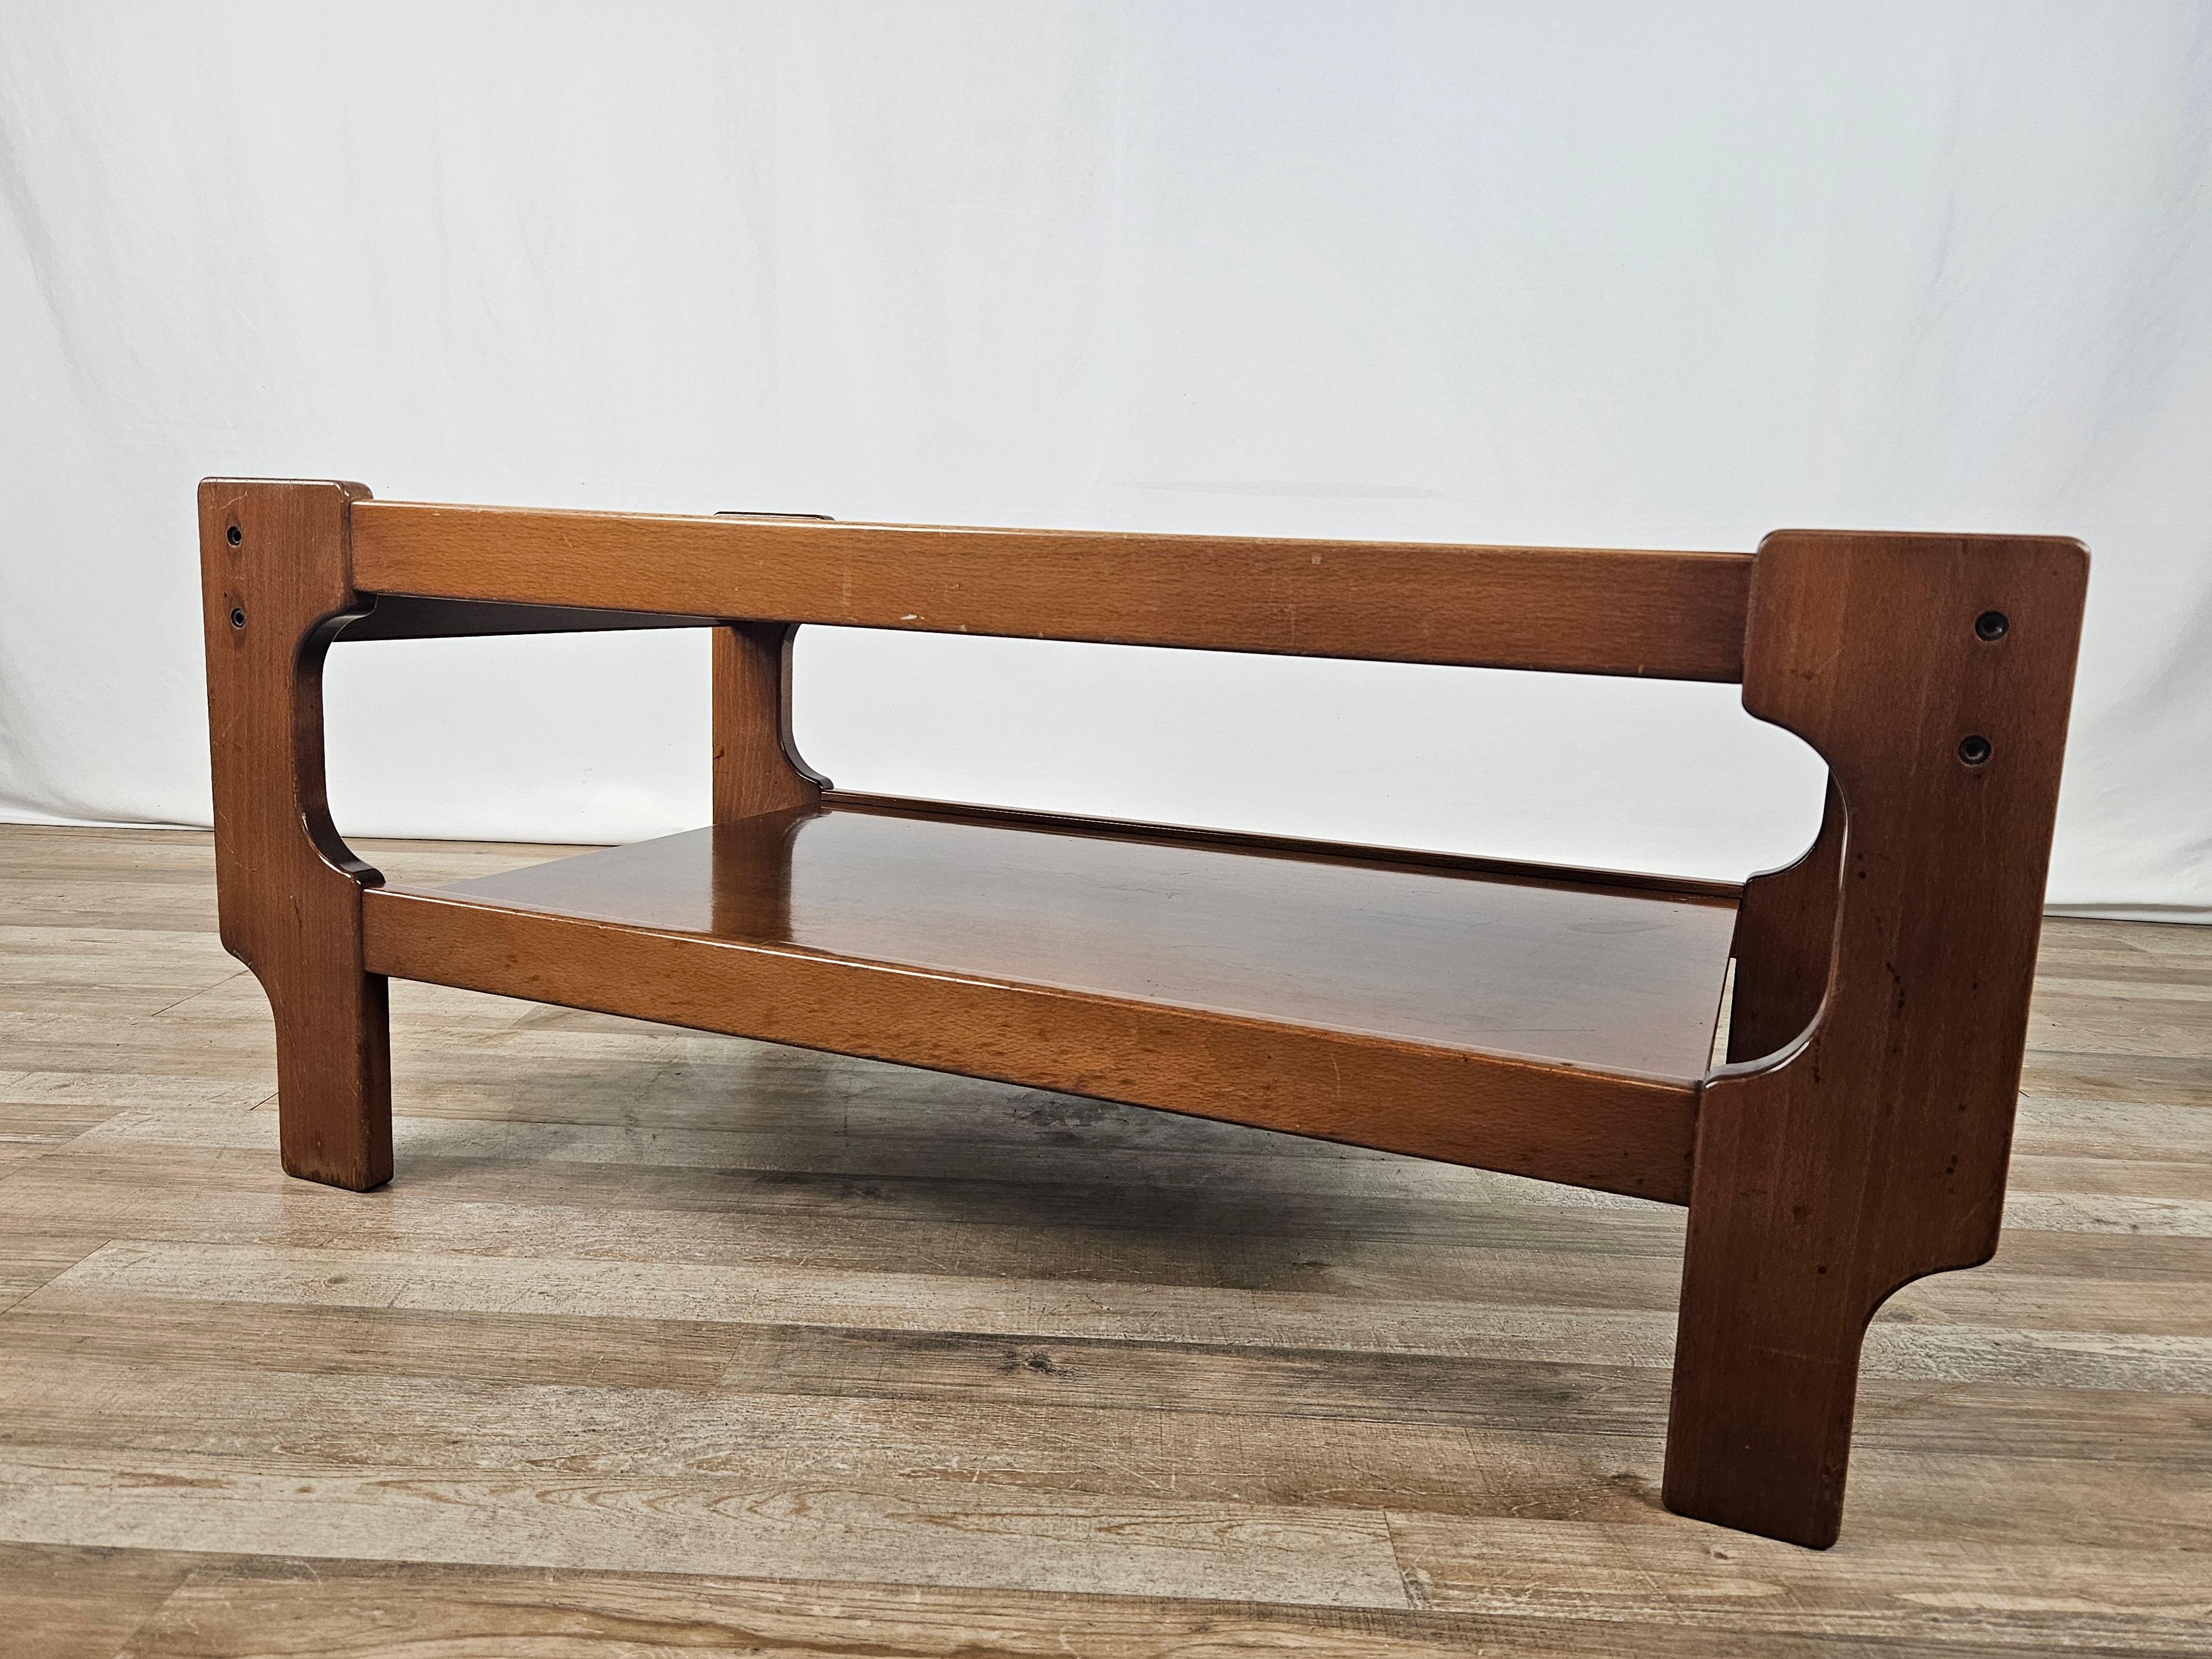 Teak wood coffee table with double shelf, one main shelf in smoked glass and one in wood.

Great furniture idea of 1970s Italian design and modernism.